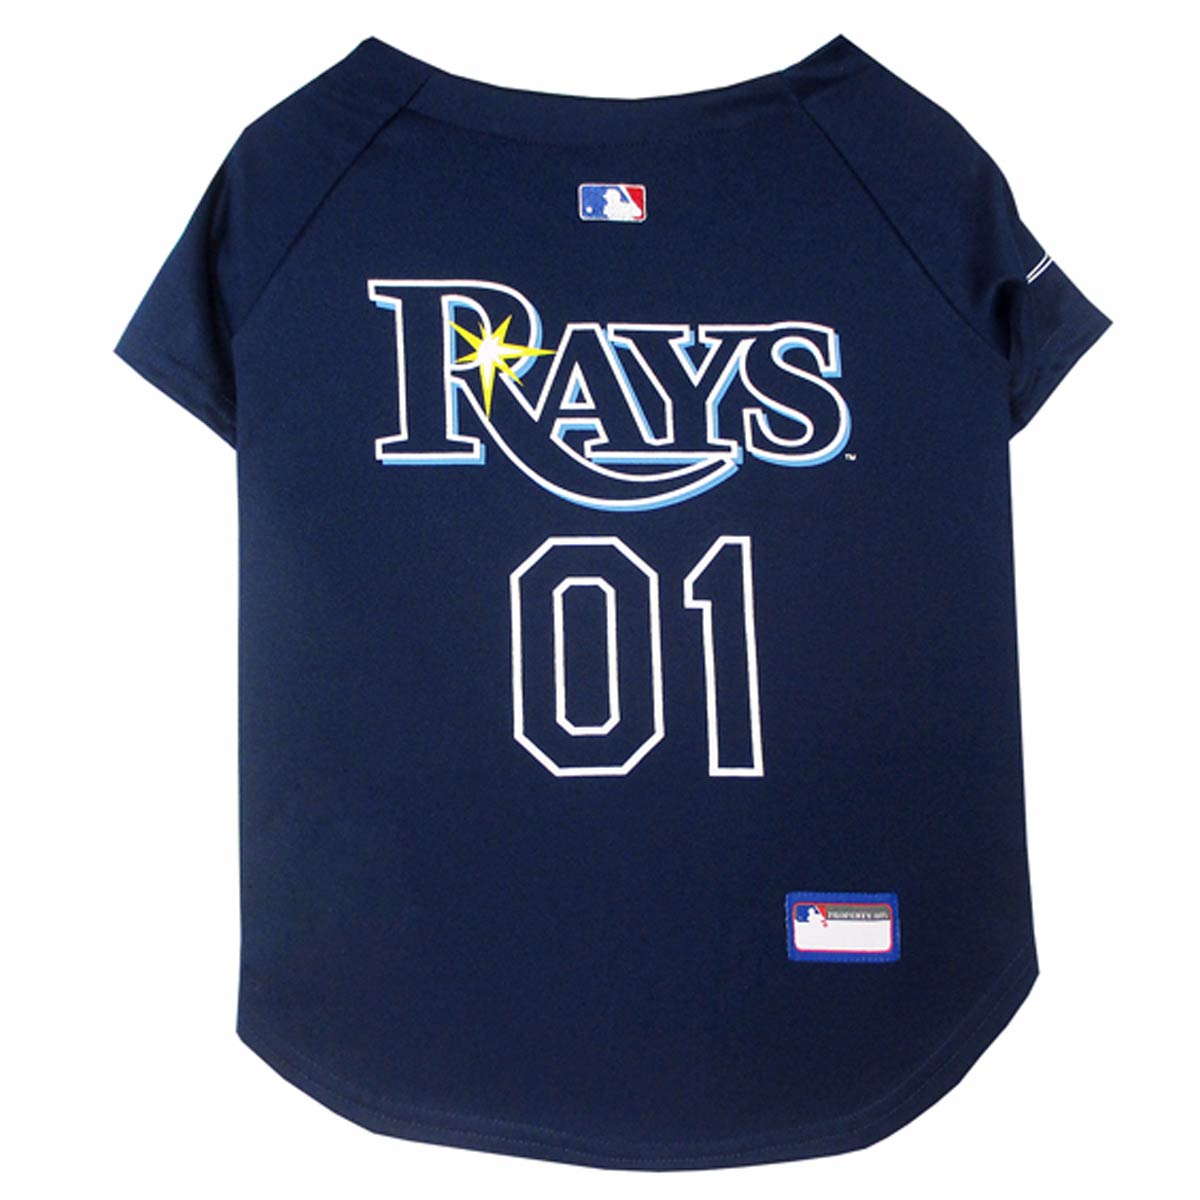 Tampa Bay Rays Officially Licensed Dog Jersey - Navy Blue